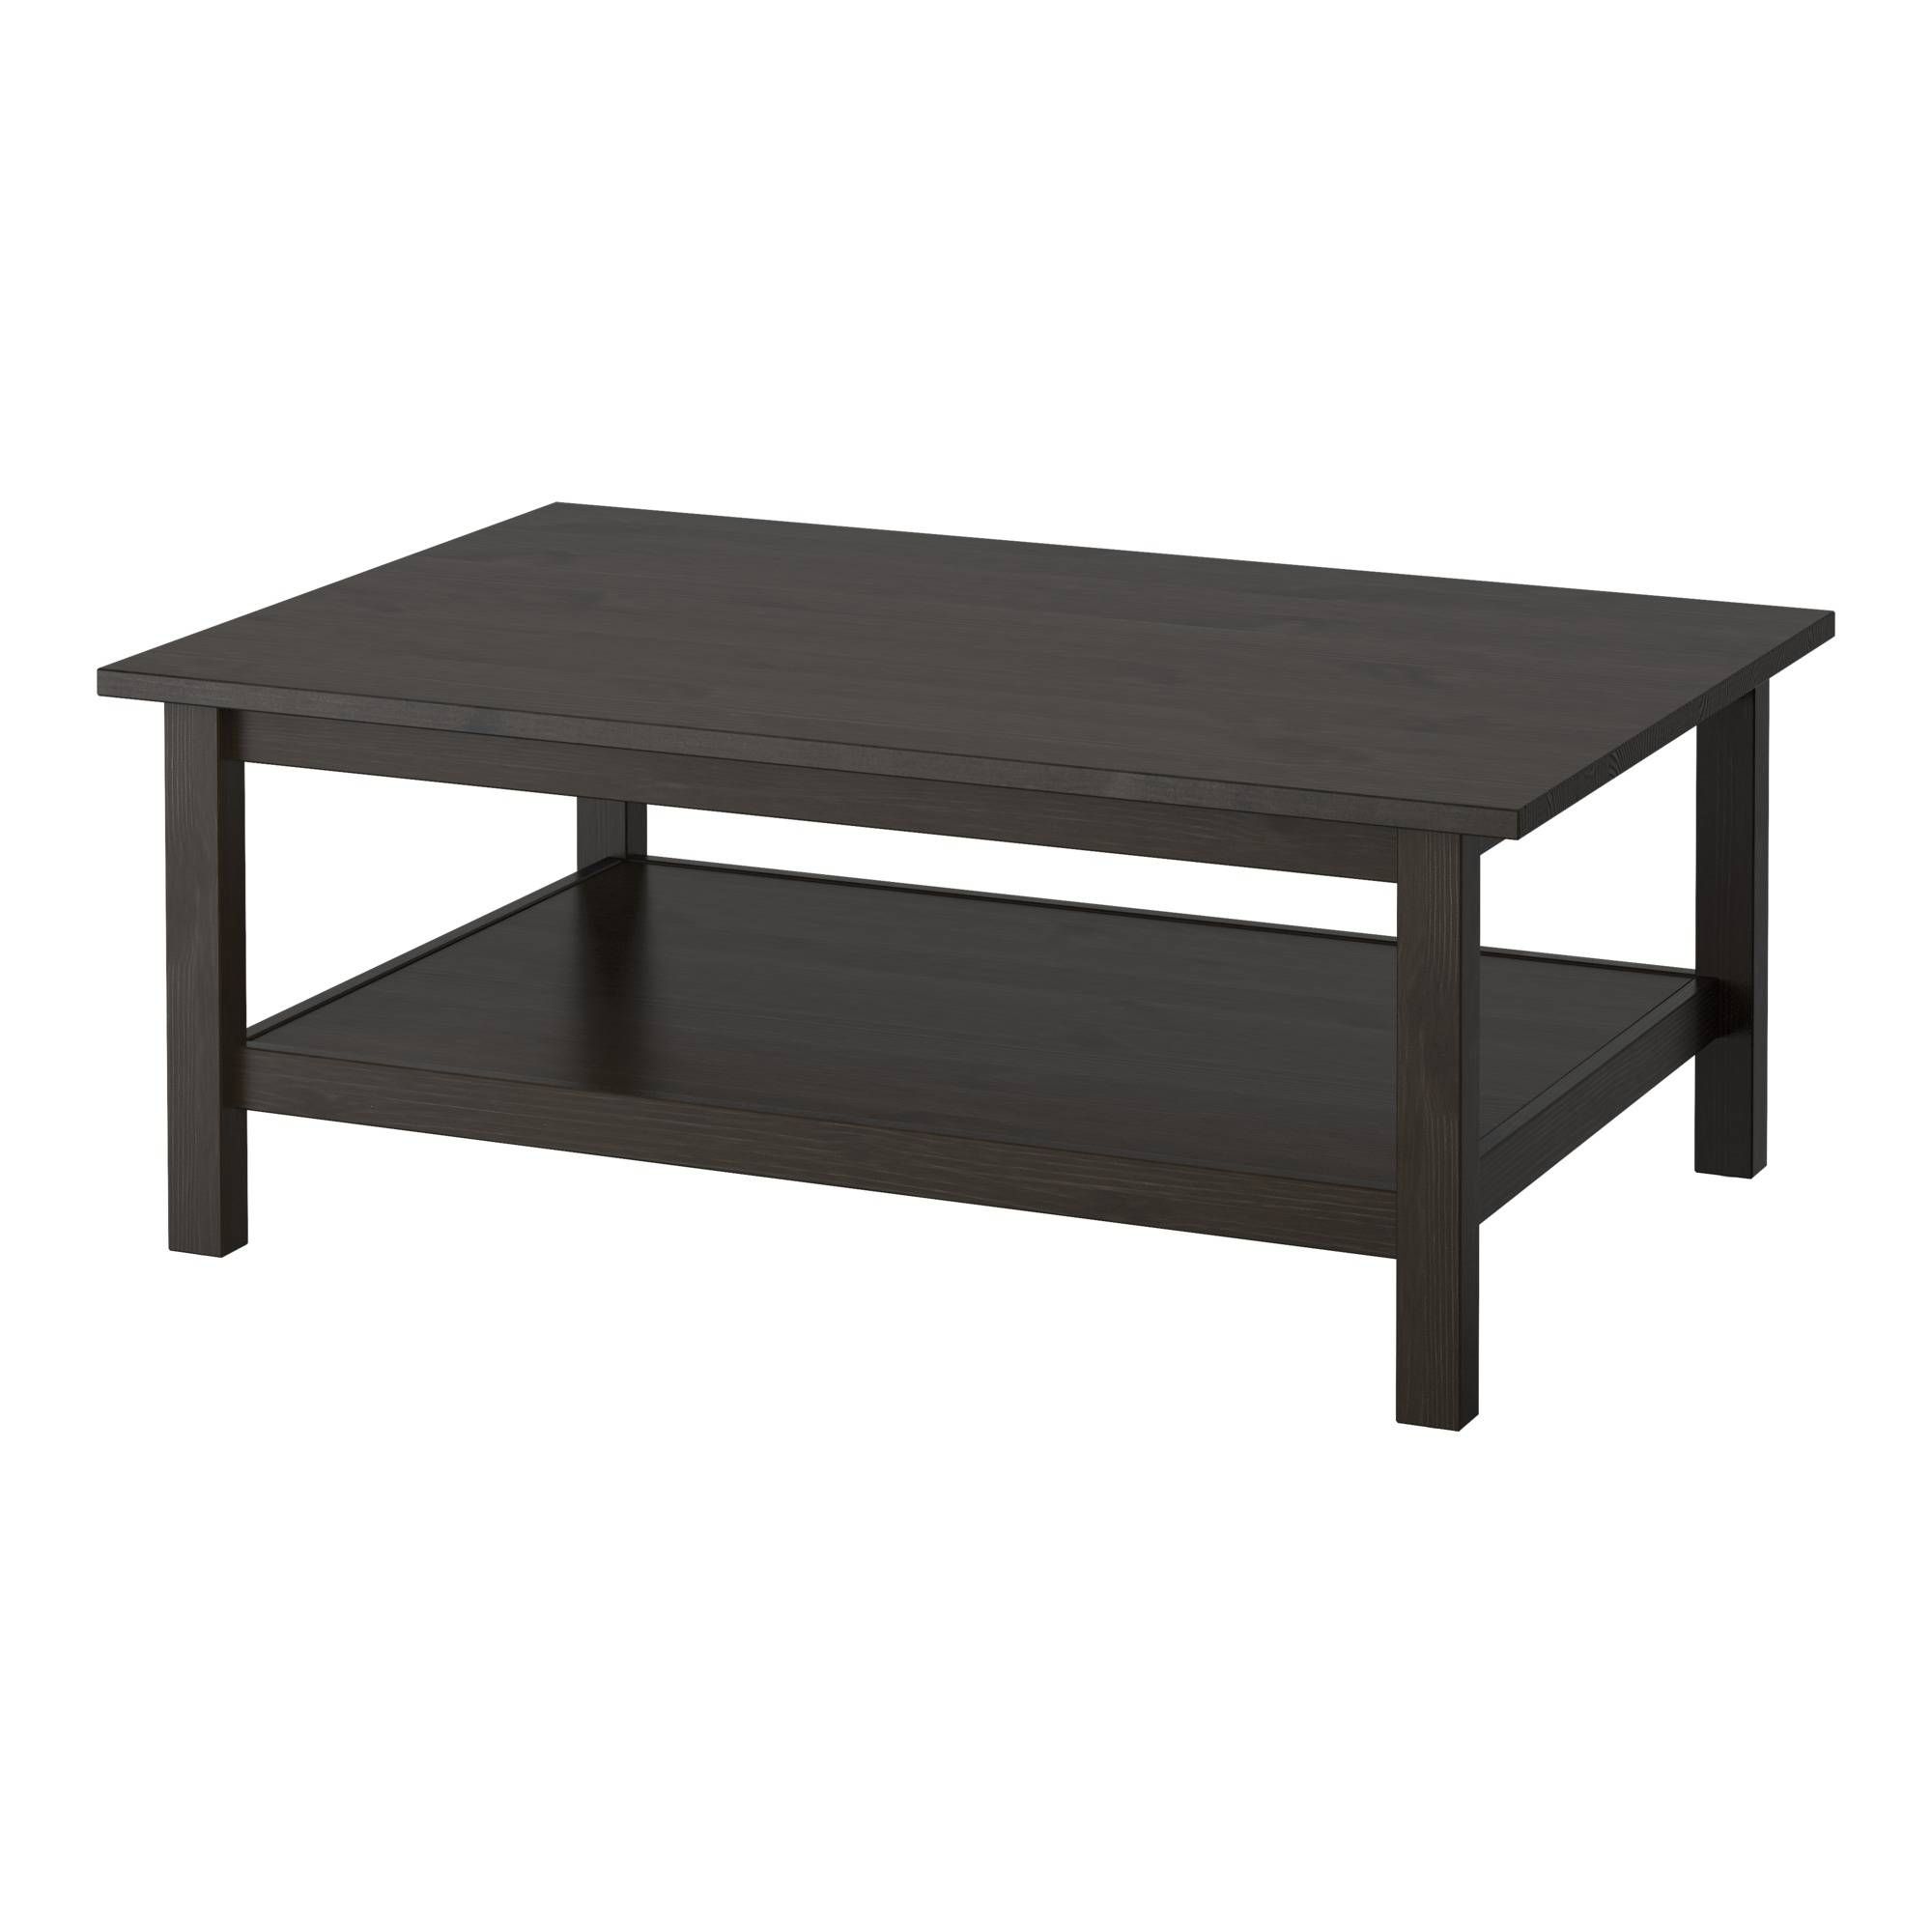 Occasional Tables – Tray, Storage & Window Tables | Ikea Throughout Large Low Level Coffee Tables (View 27 of 30)